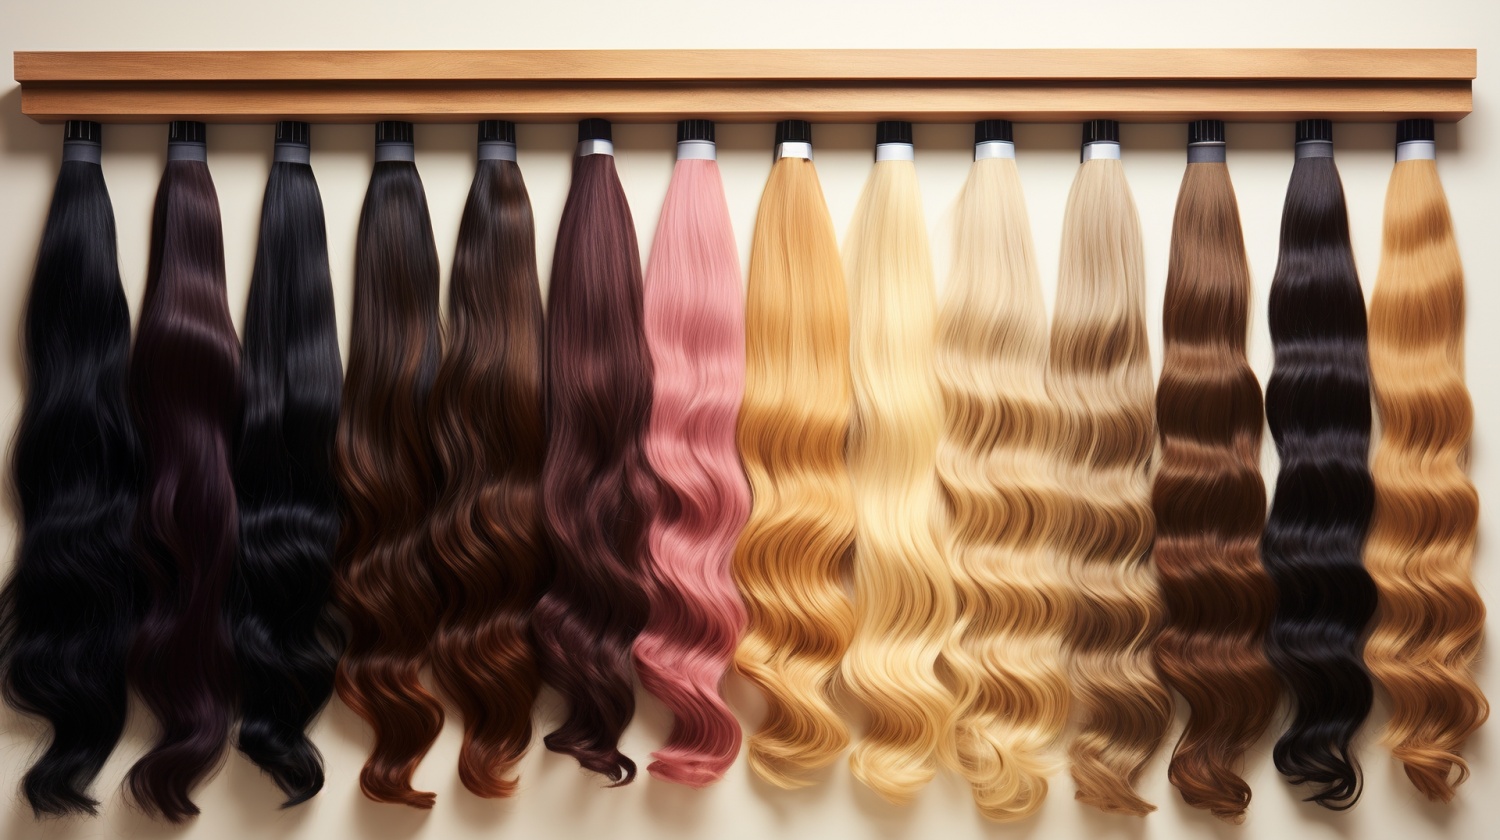 Steps to Make Your Extensions Last Longer